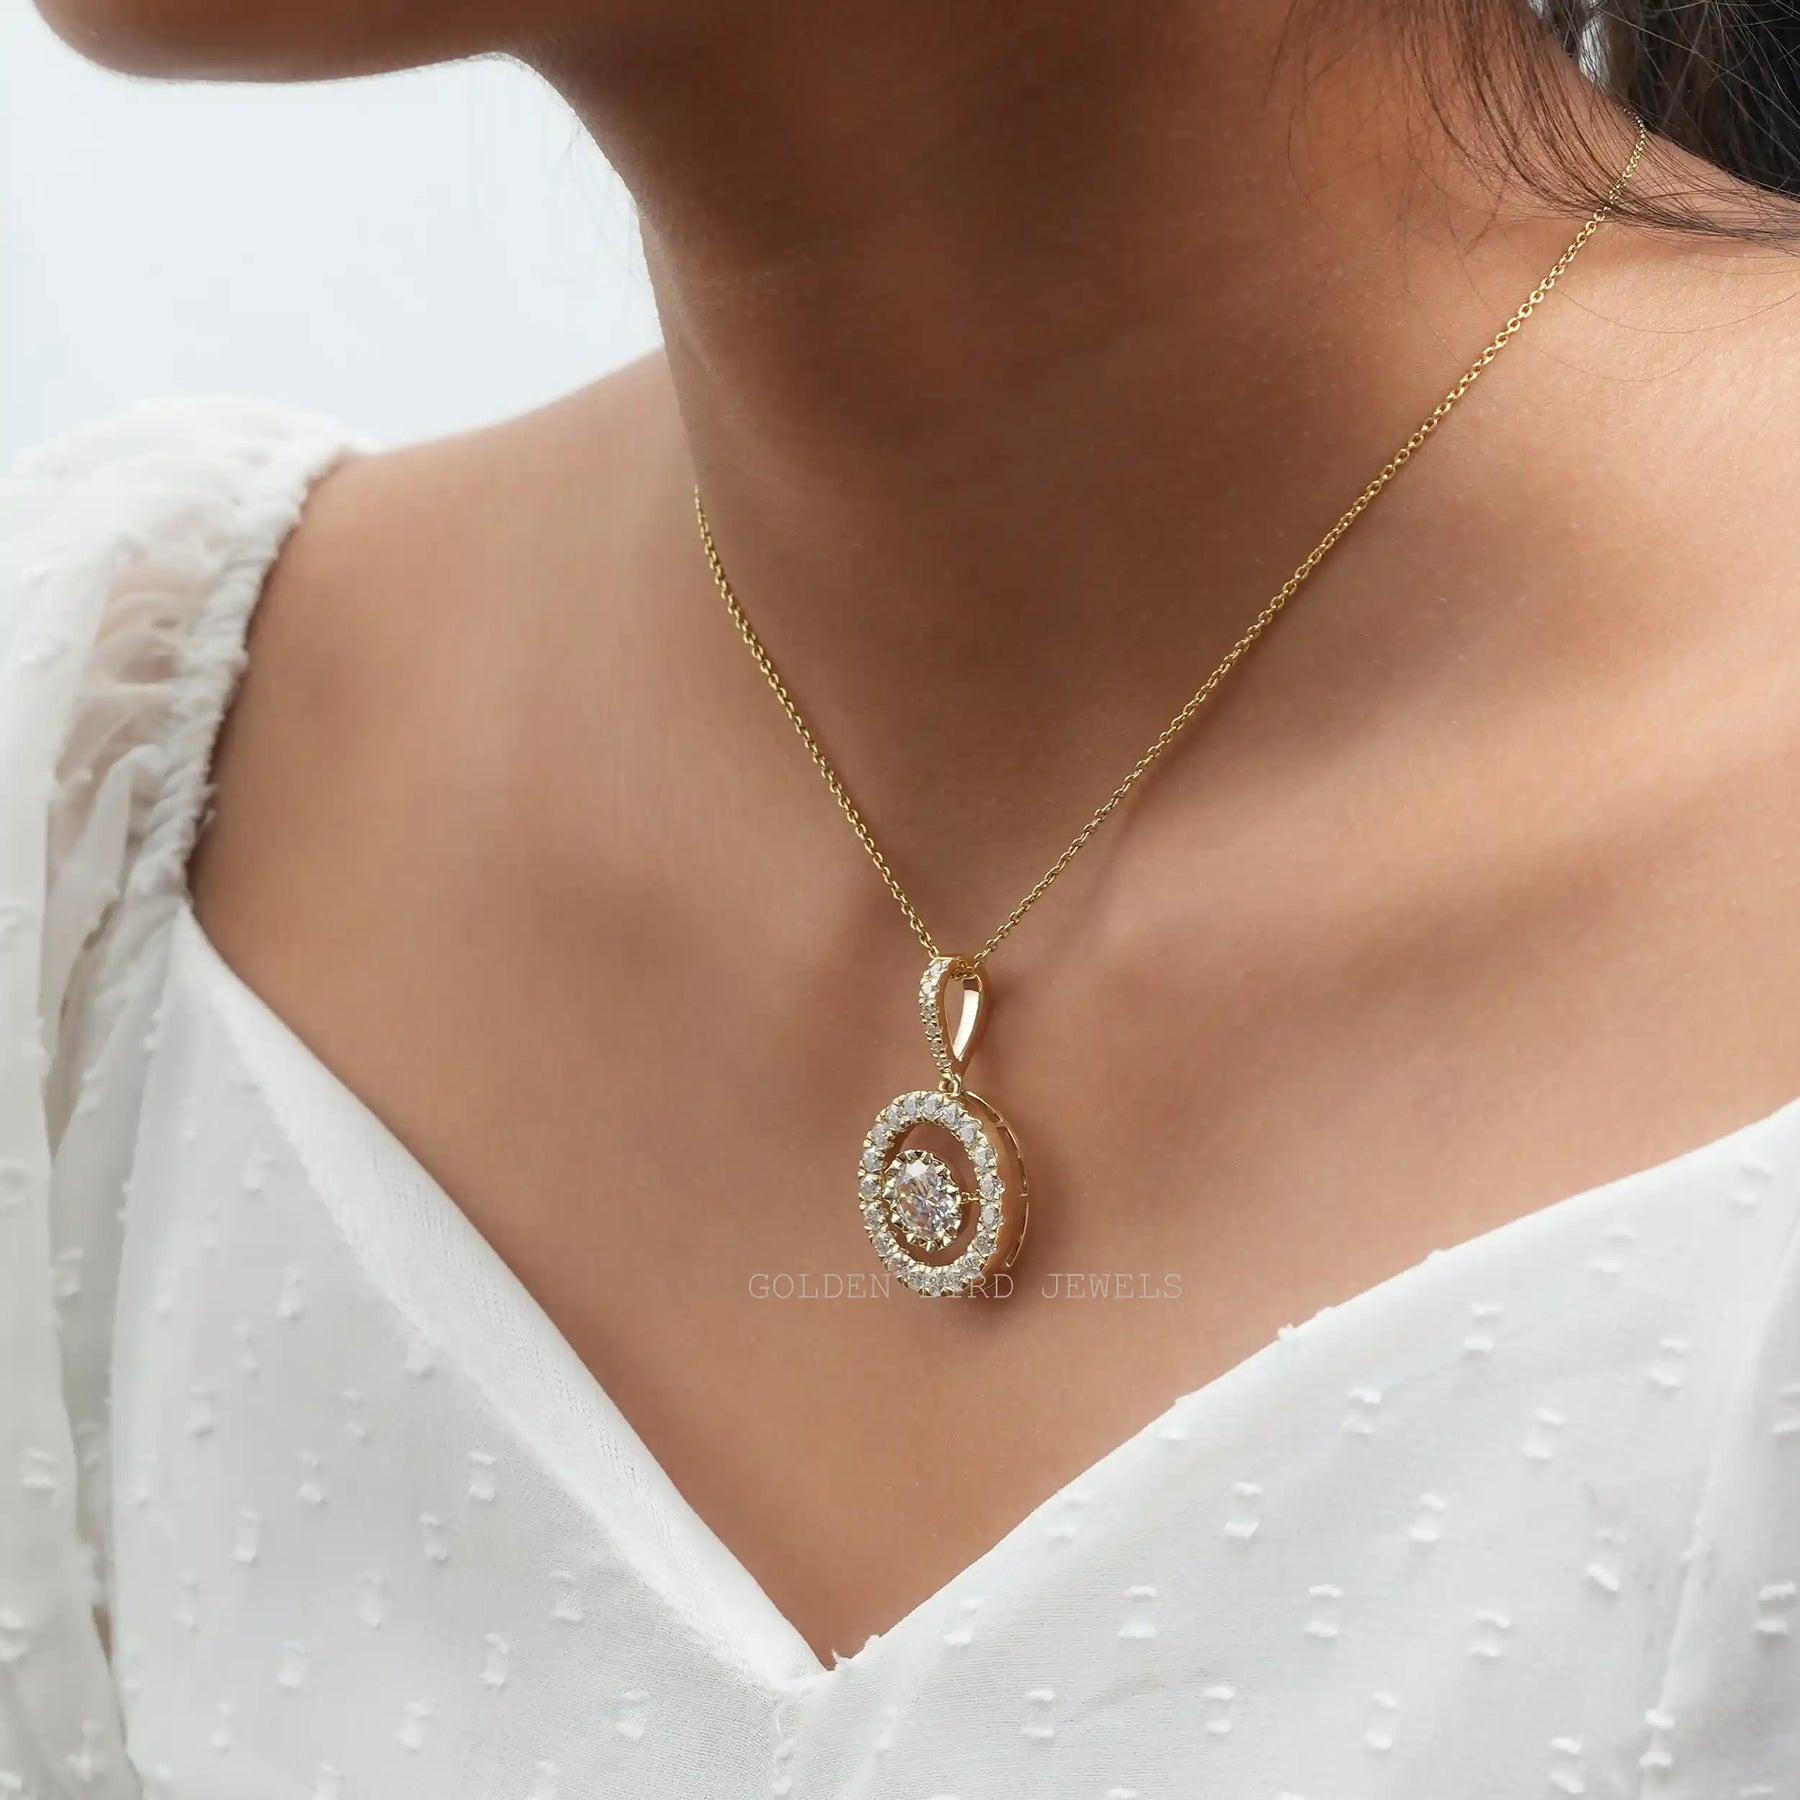 [In neck front view of yellow gold round cut moissanite pendant]-[Golden Bird Jewels]